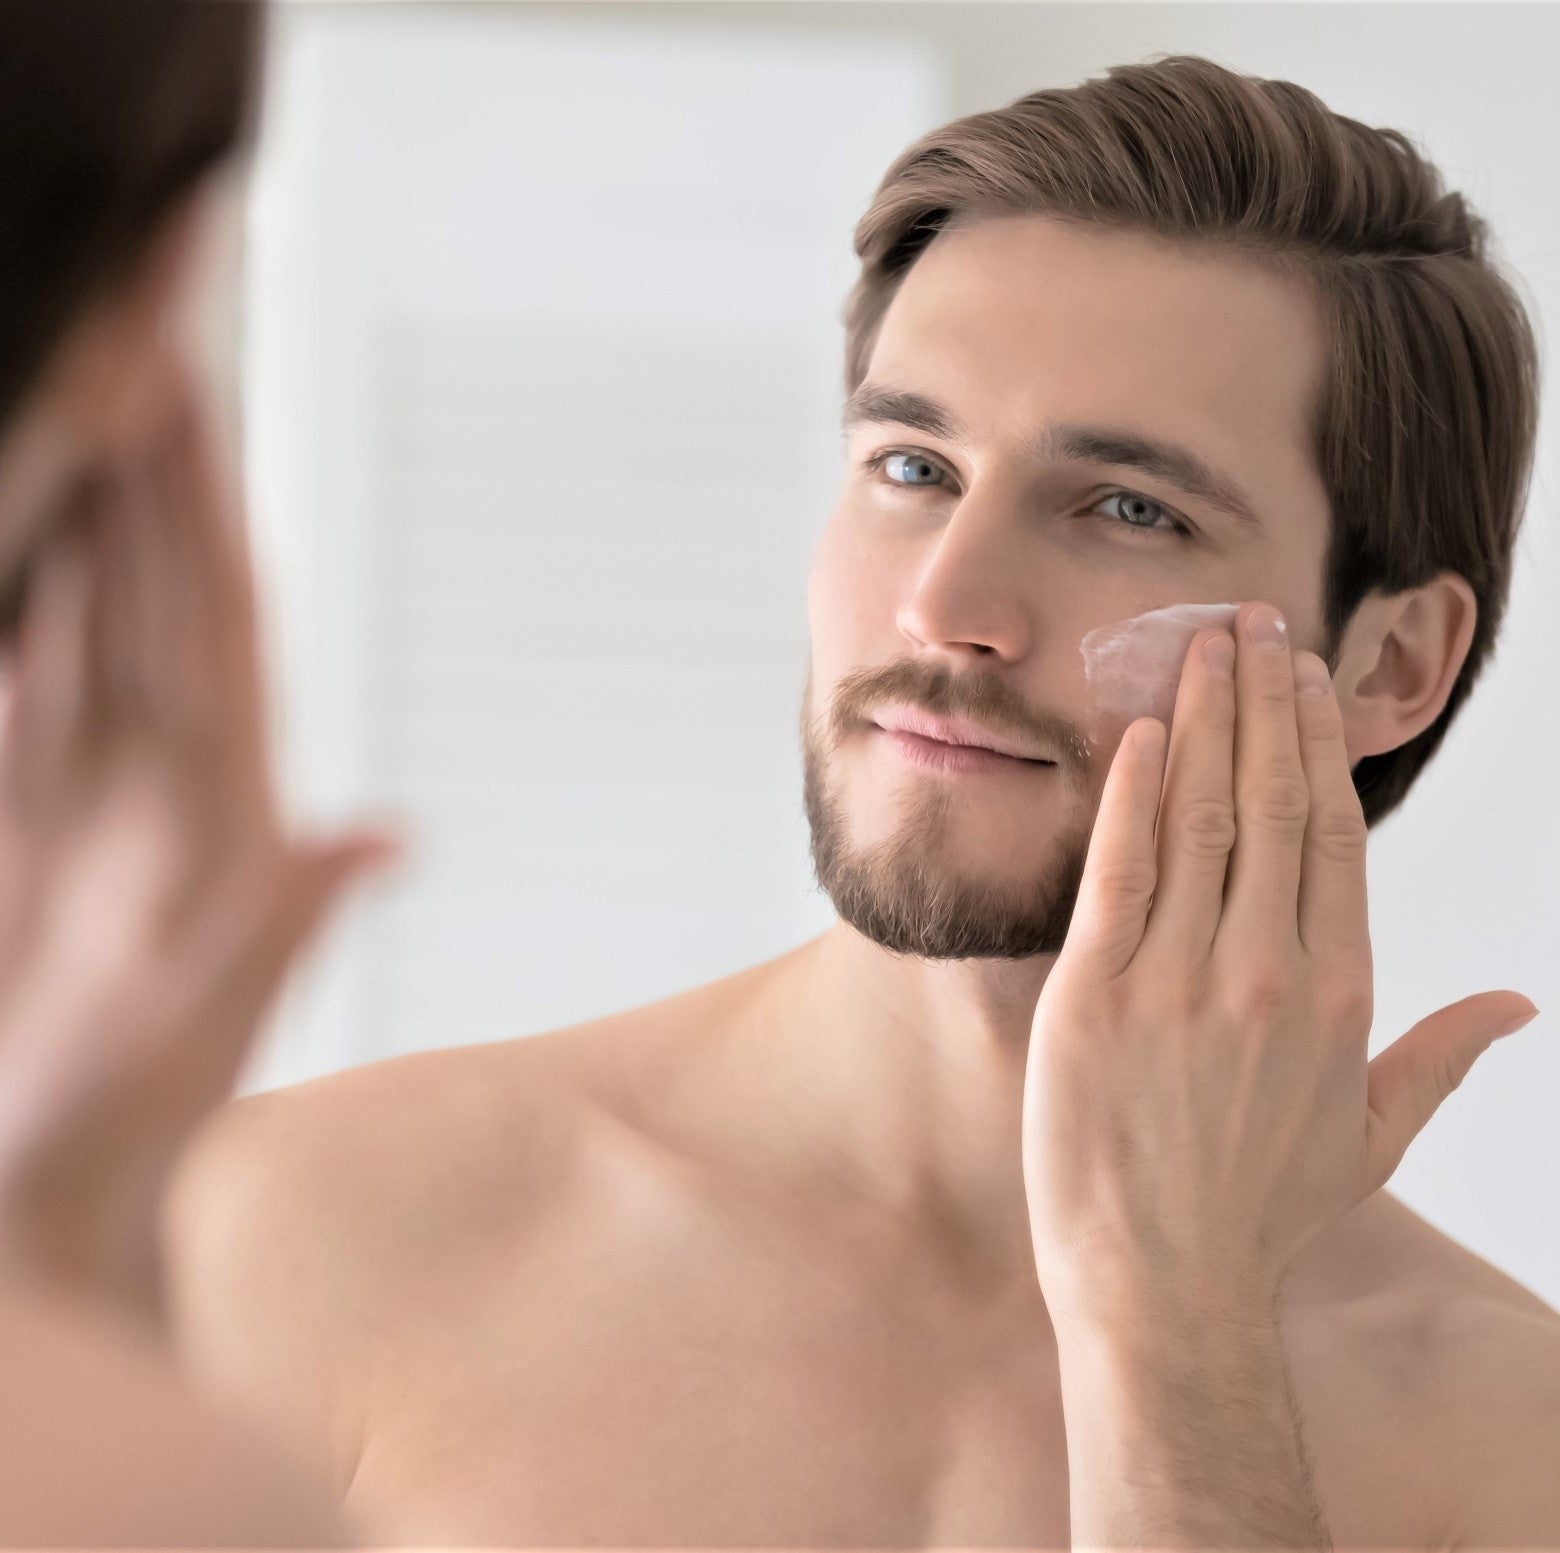 A man applies Dermaworks expert daily moisturiser for men to his face. Our anti-aging face cream for men helps to hydrate, brighten and reduce the appearance of wrinkles.